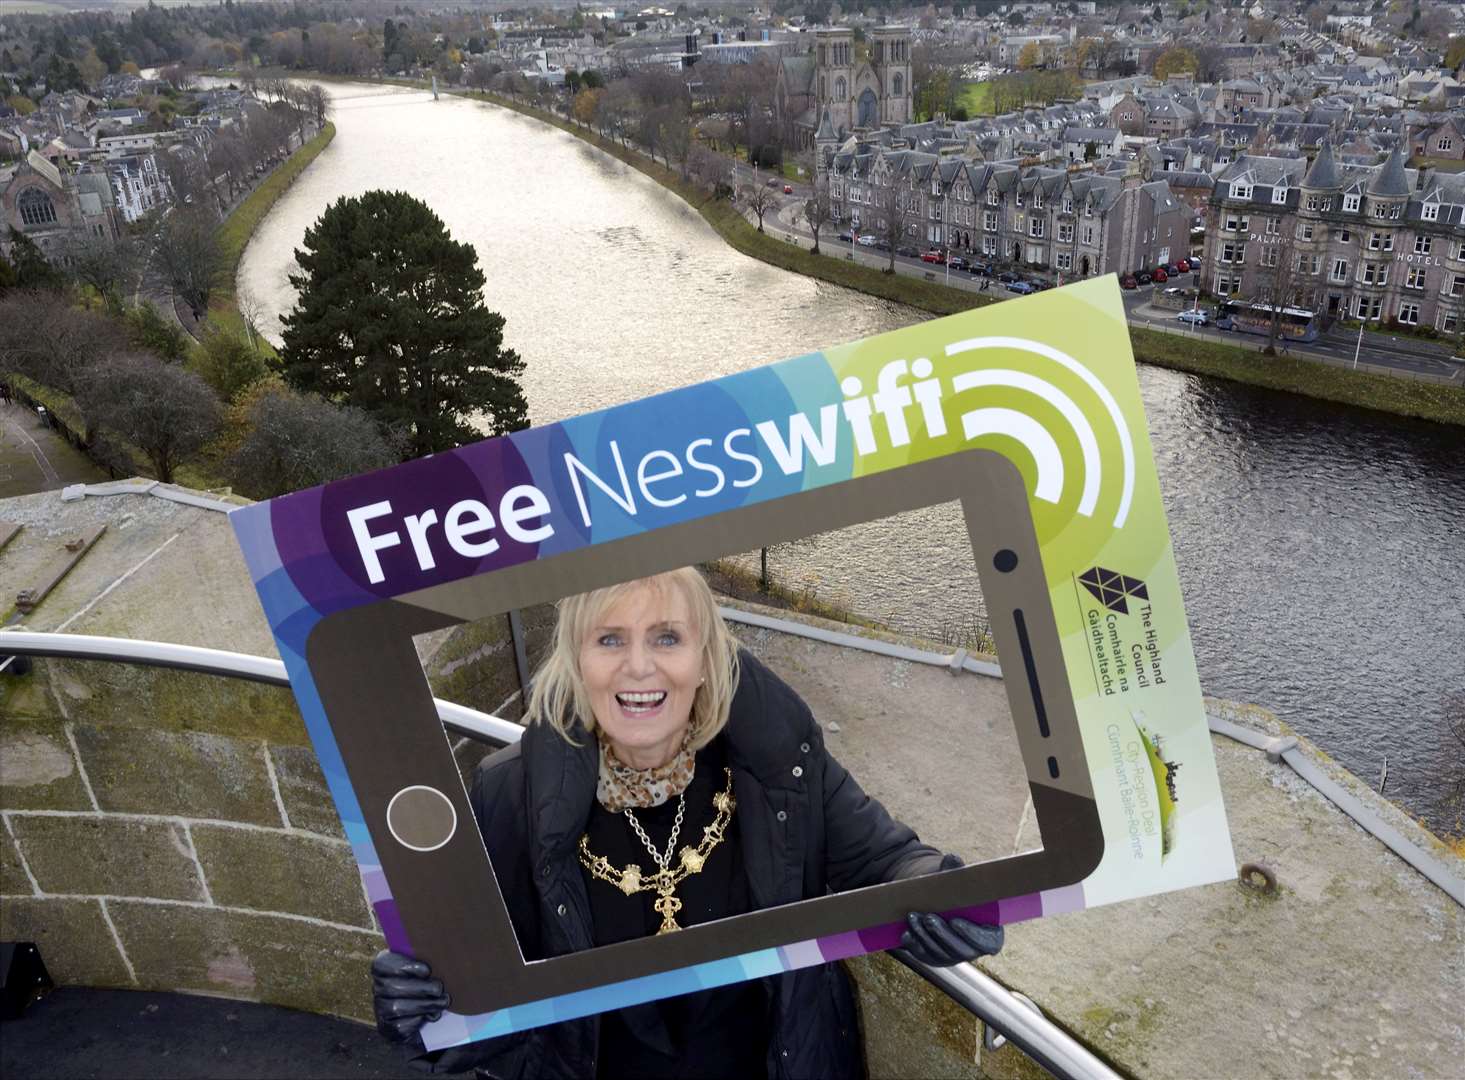 Inverness Provost Helen Carmichael marks the roll out of the free wi-fi in Inverness city centre.